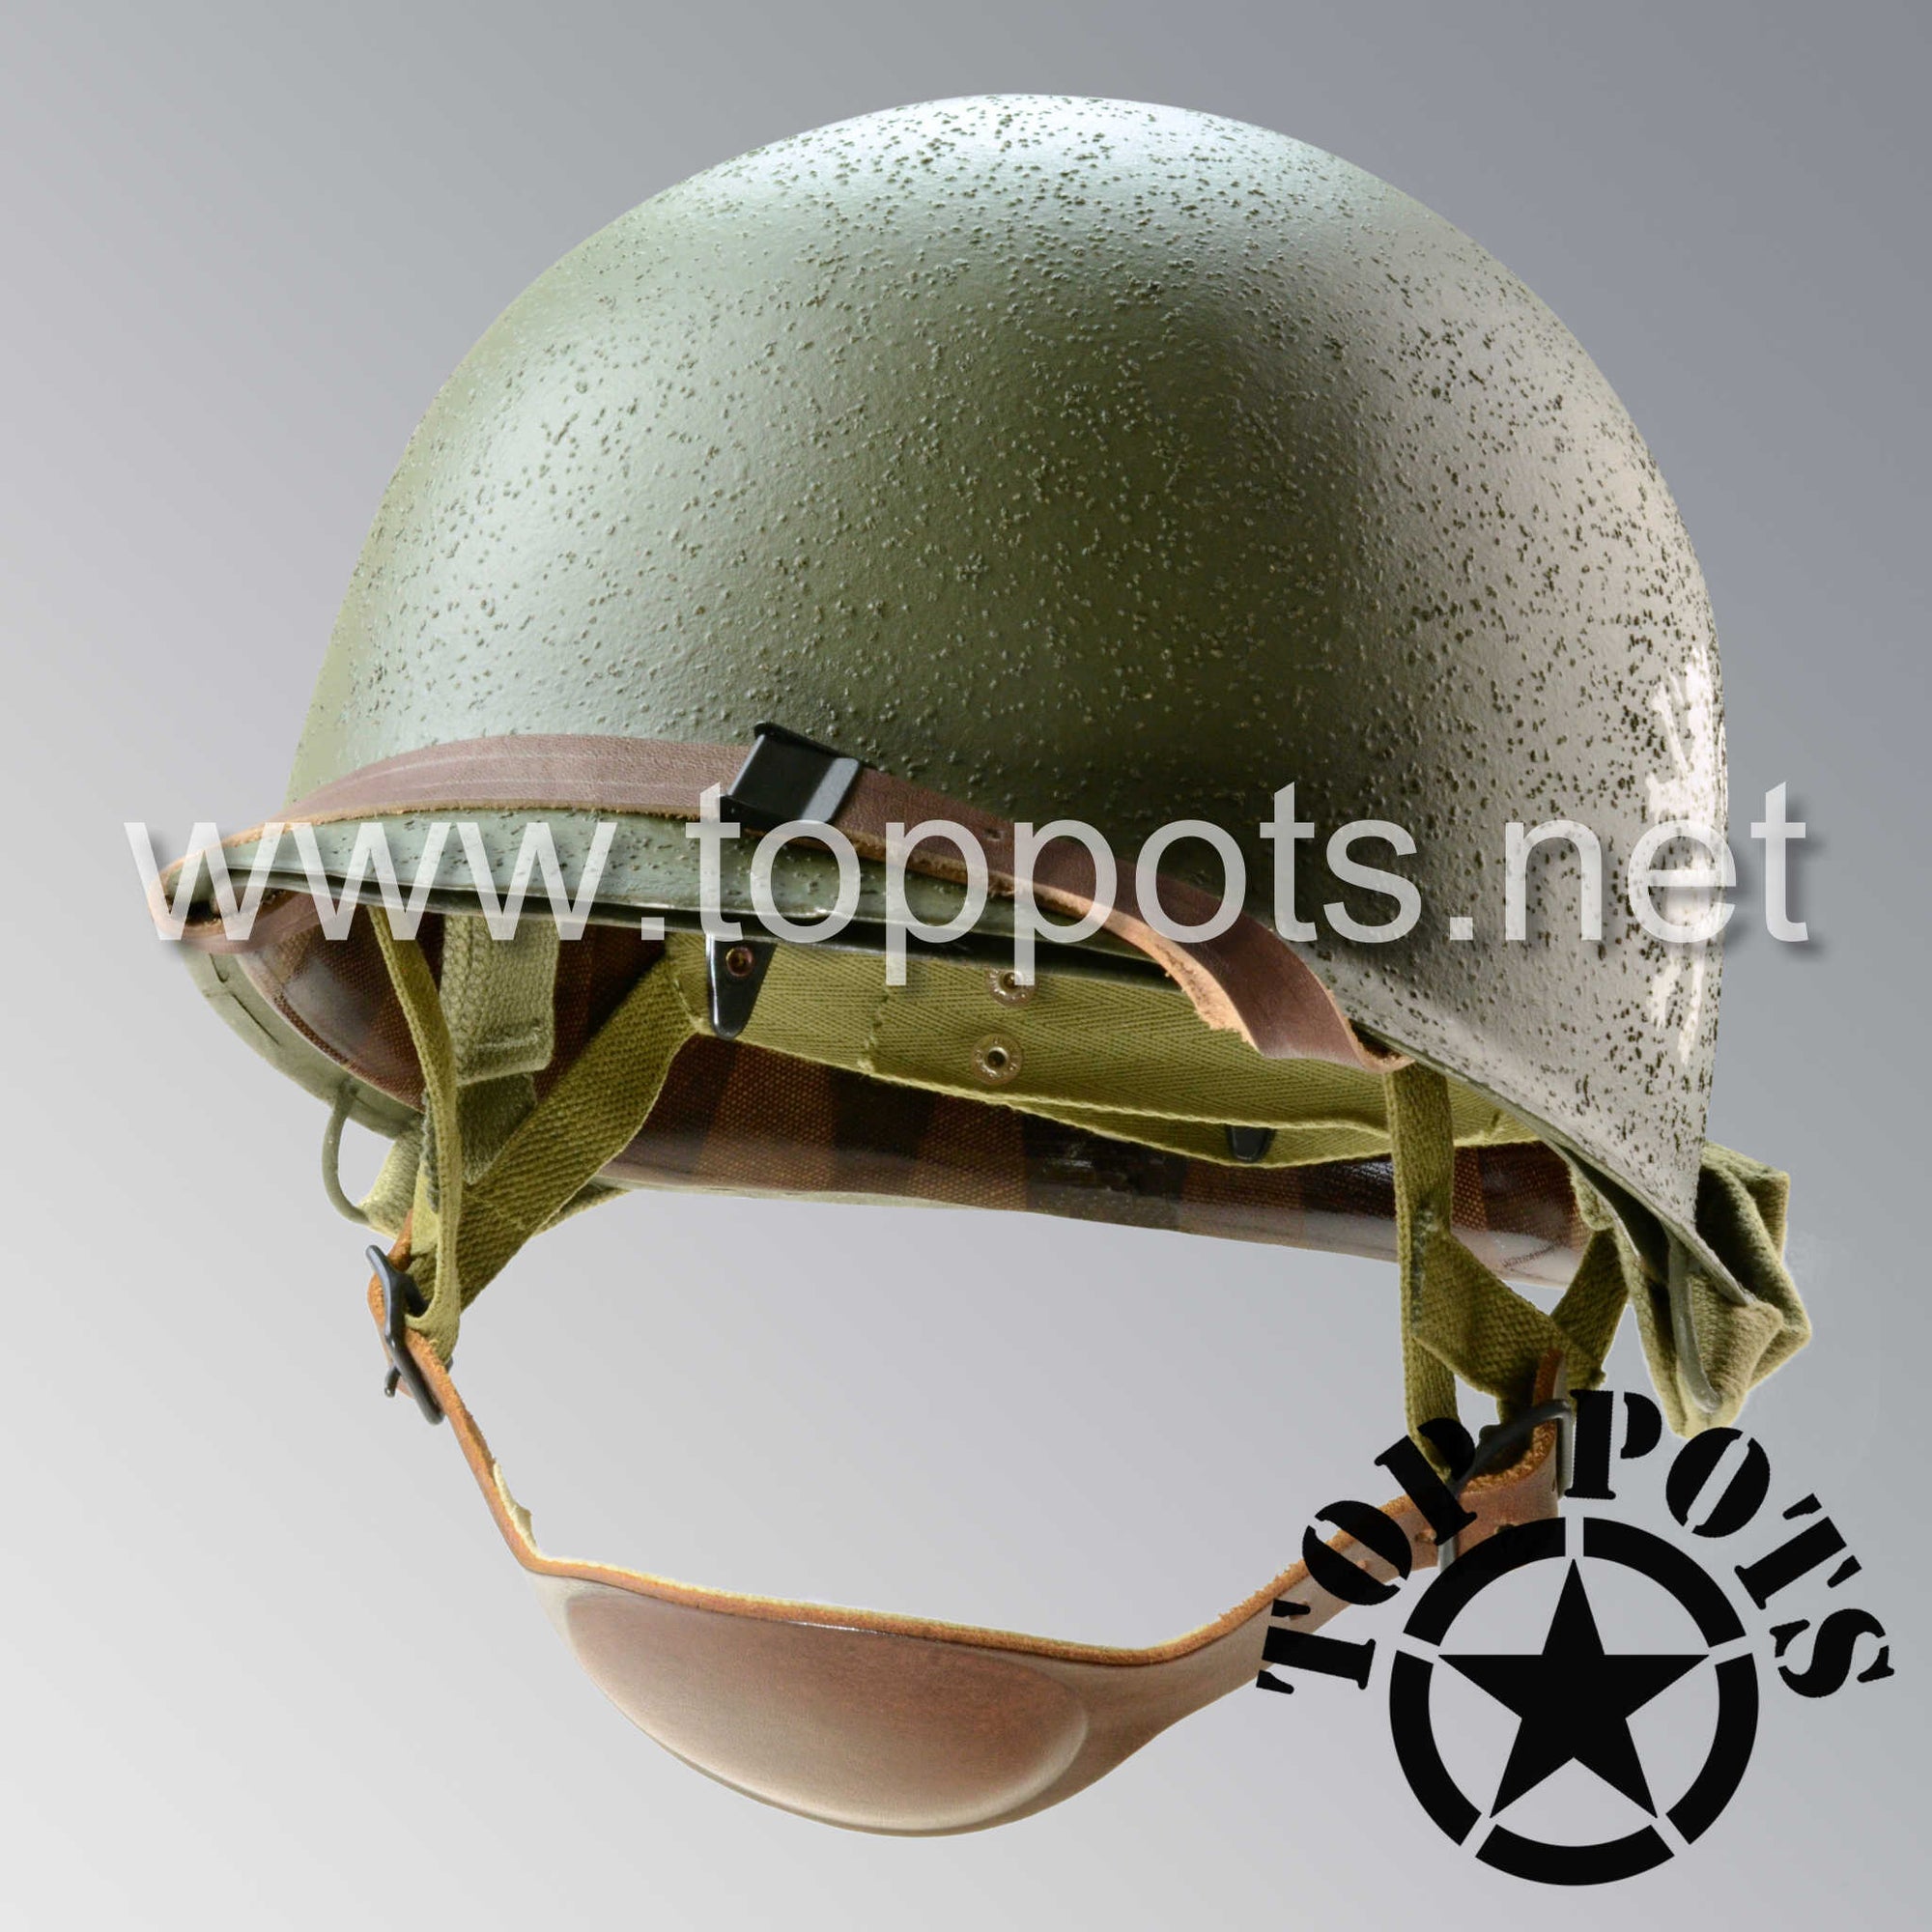 WWII US Army Restored Original M2 Paratrooper Airborne Helmet D Bale Shell and Liner with 505th PIR NCO Emblem